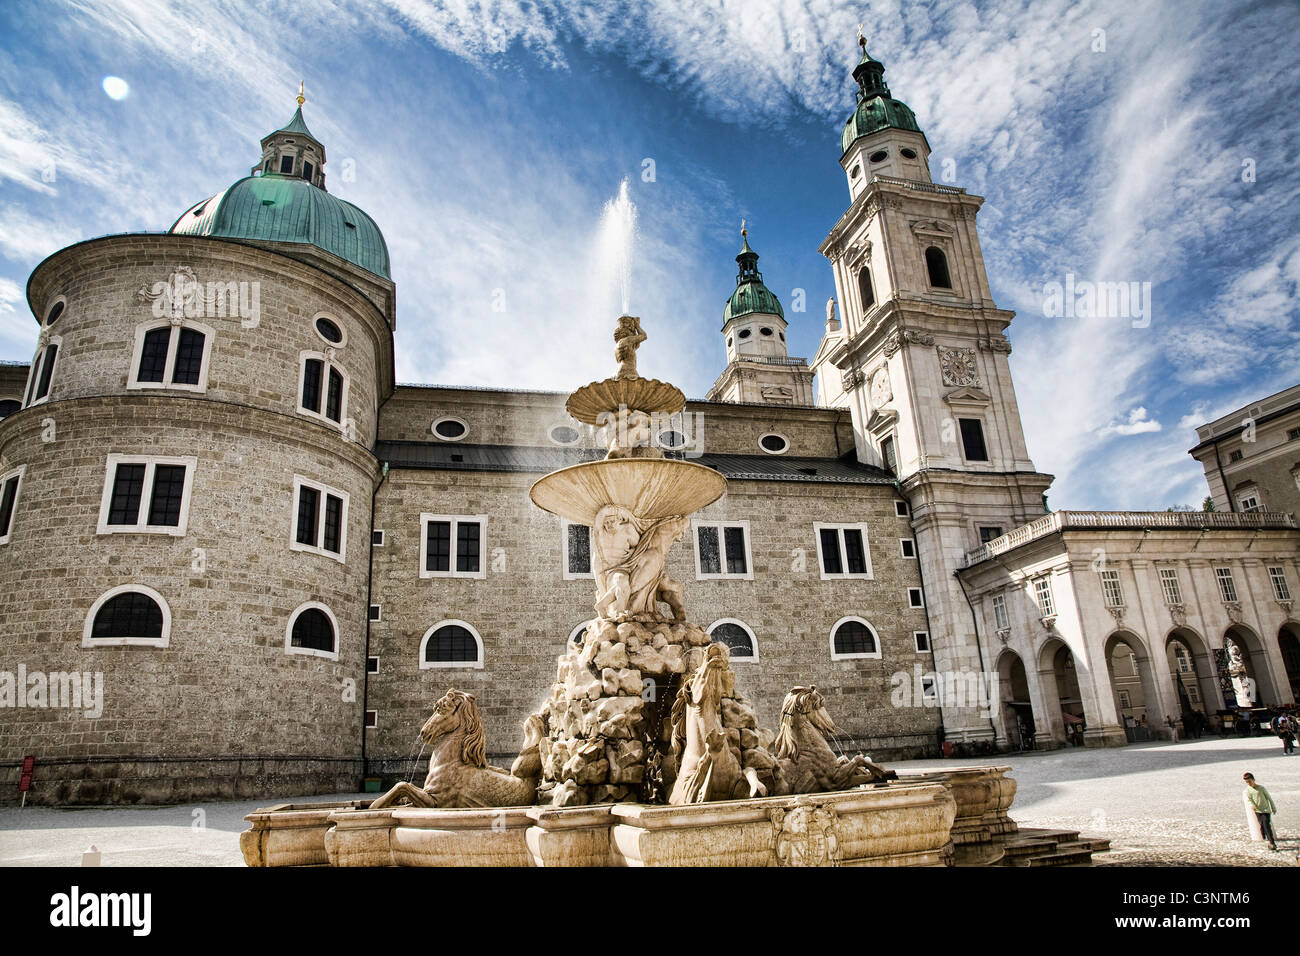 The Salzburg Cathedral and fountain in Residence Square. Austria. Stock Photo